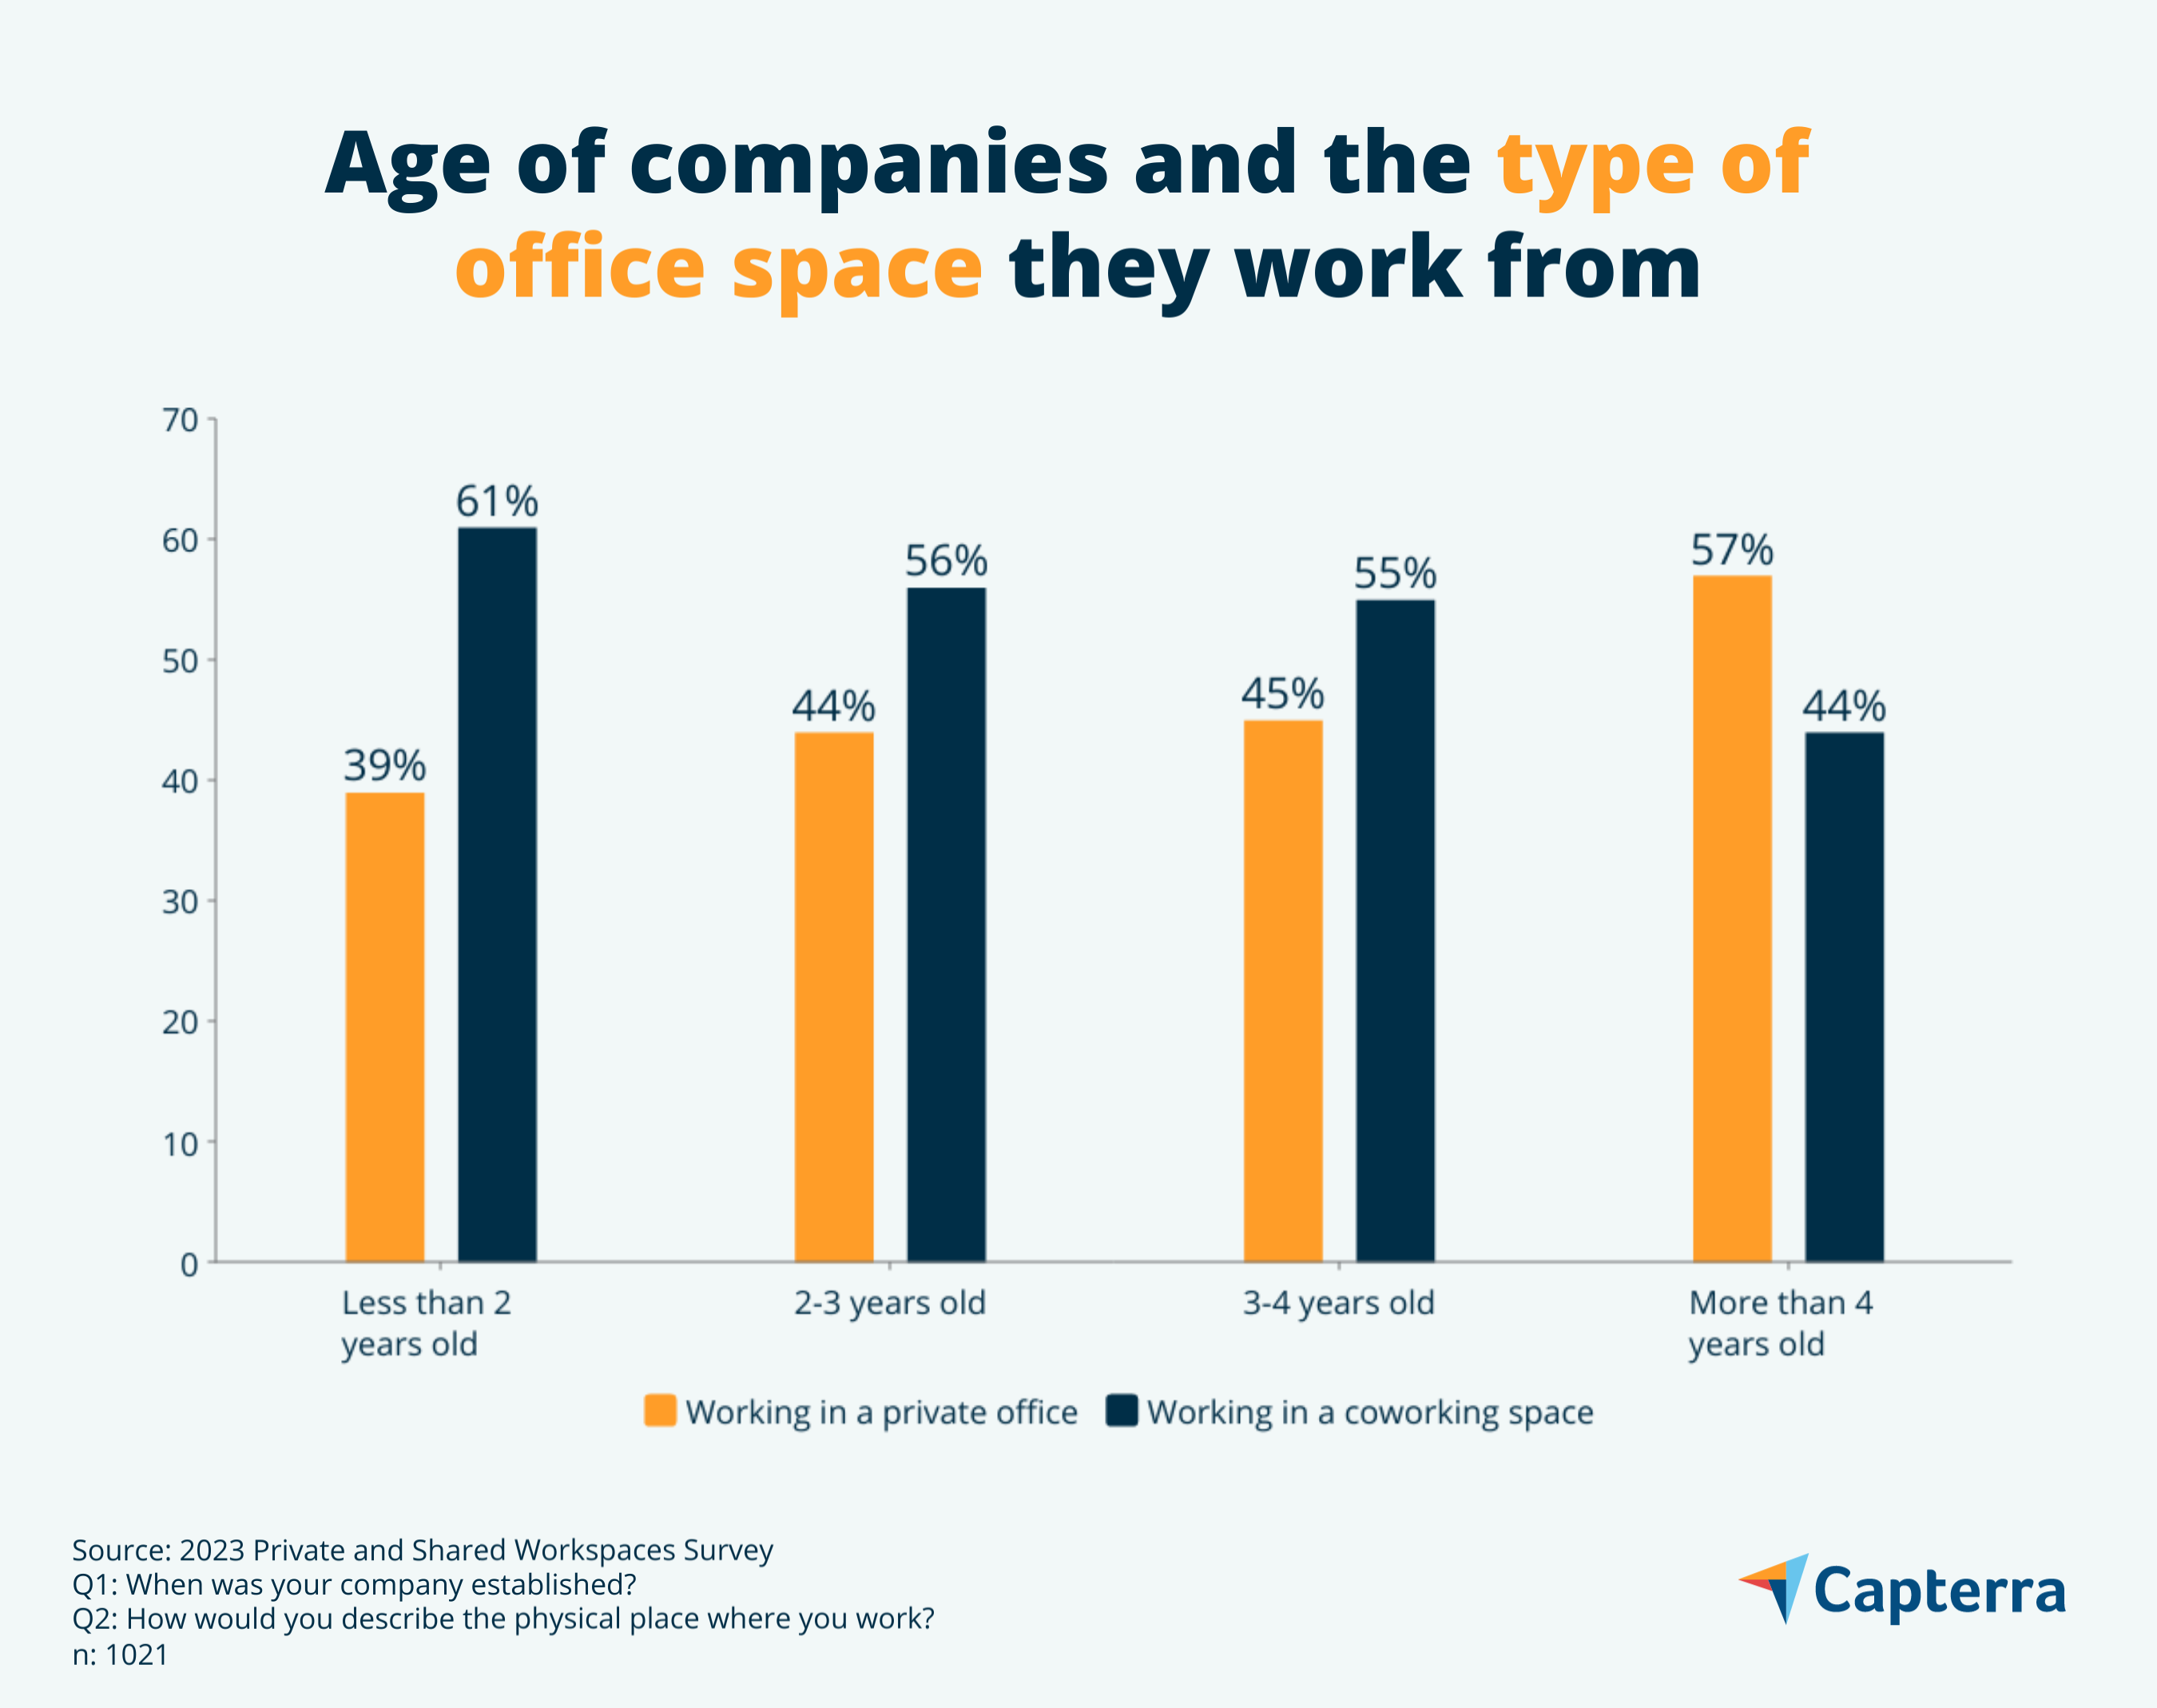 private office vs coworking space by age of company
